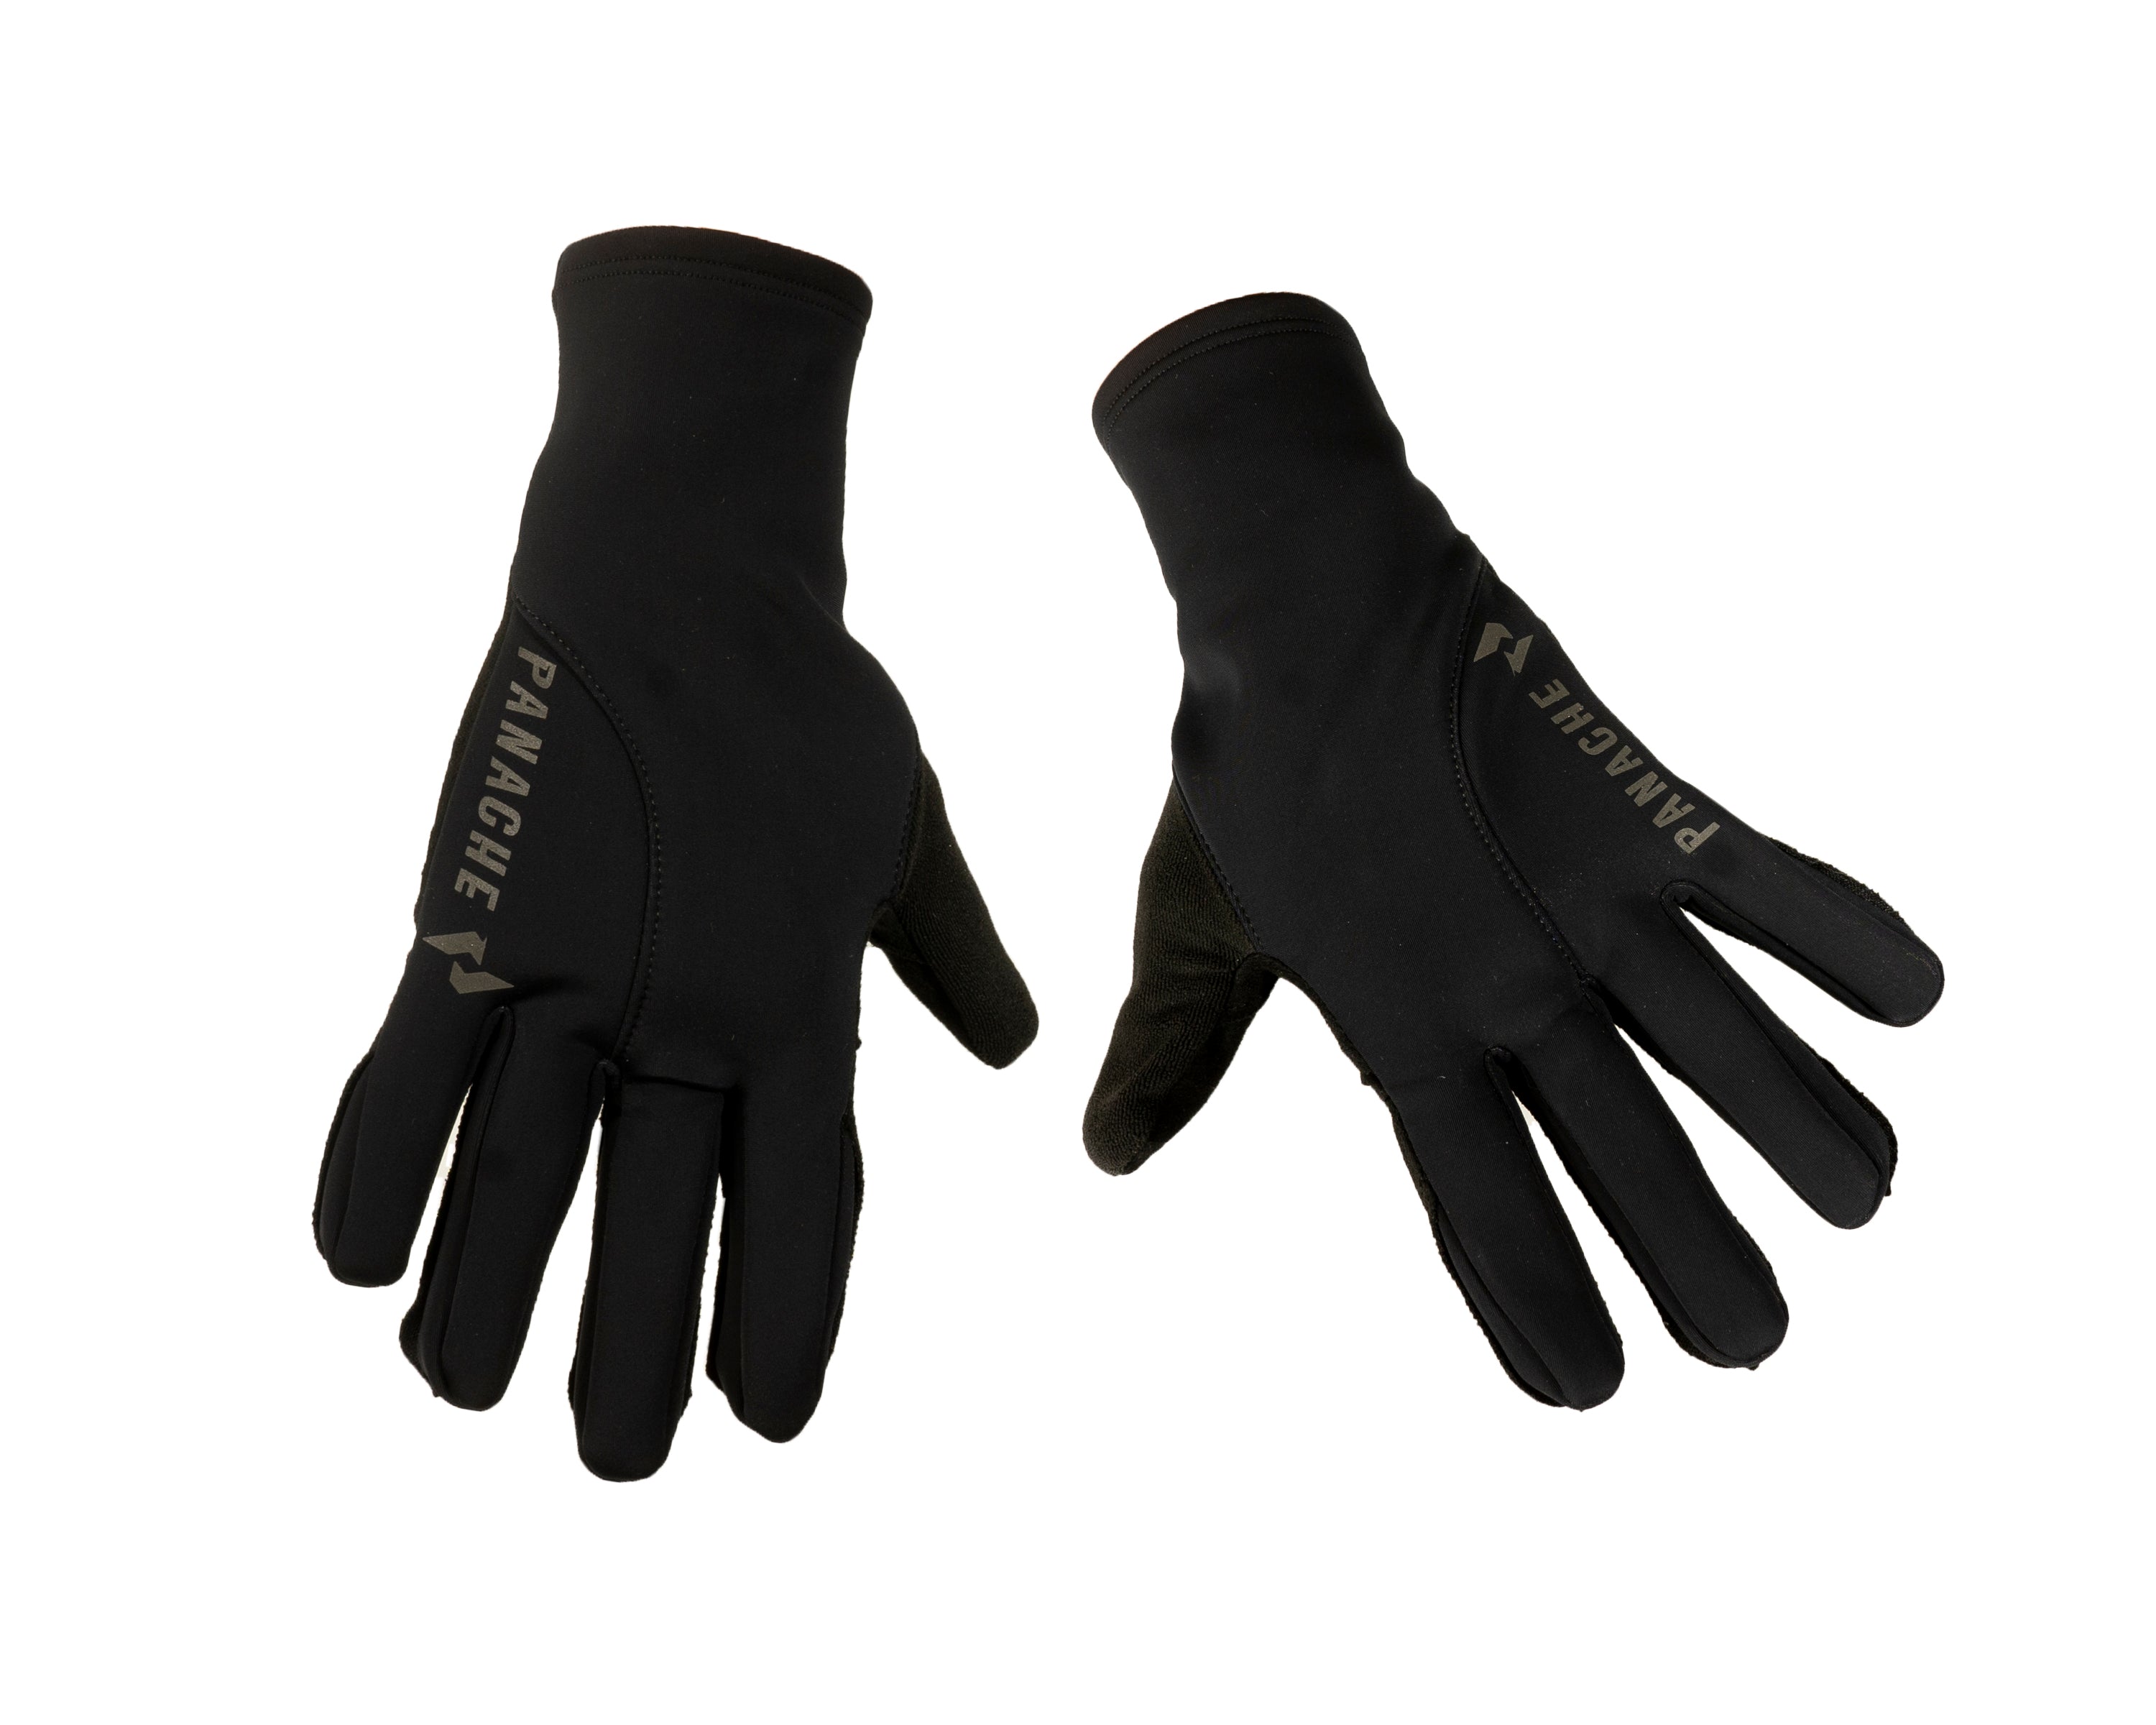 Pro Issue Thermal Glove